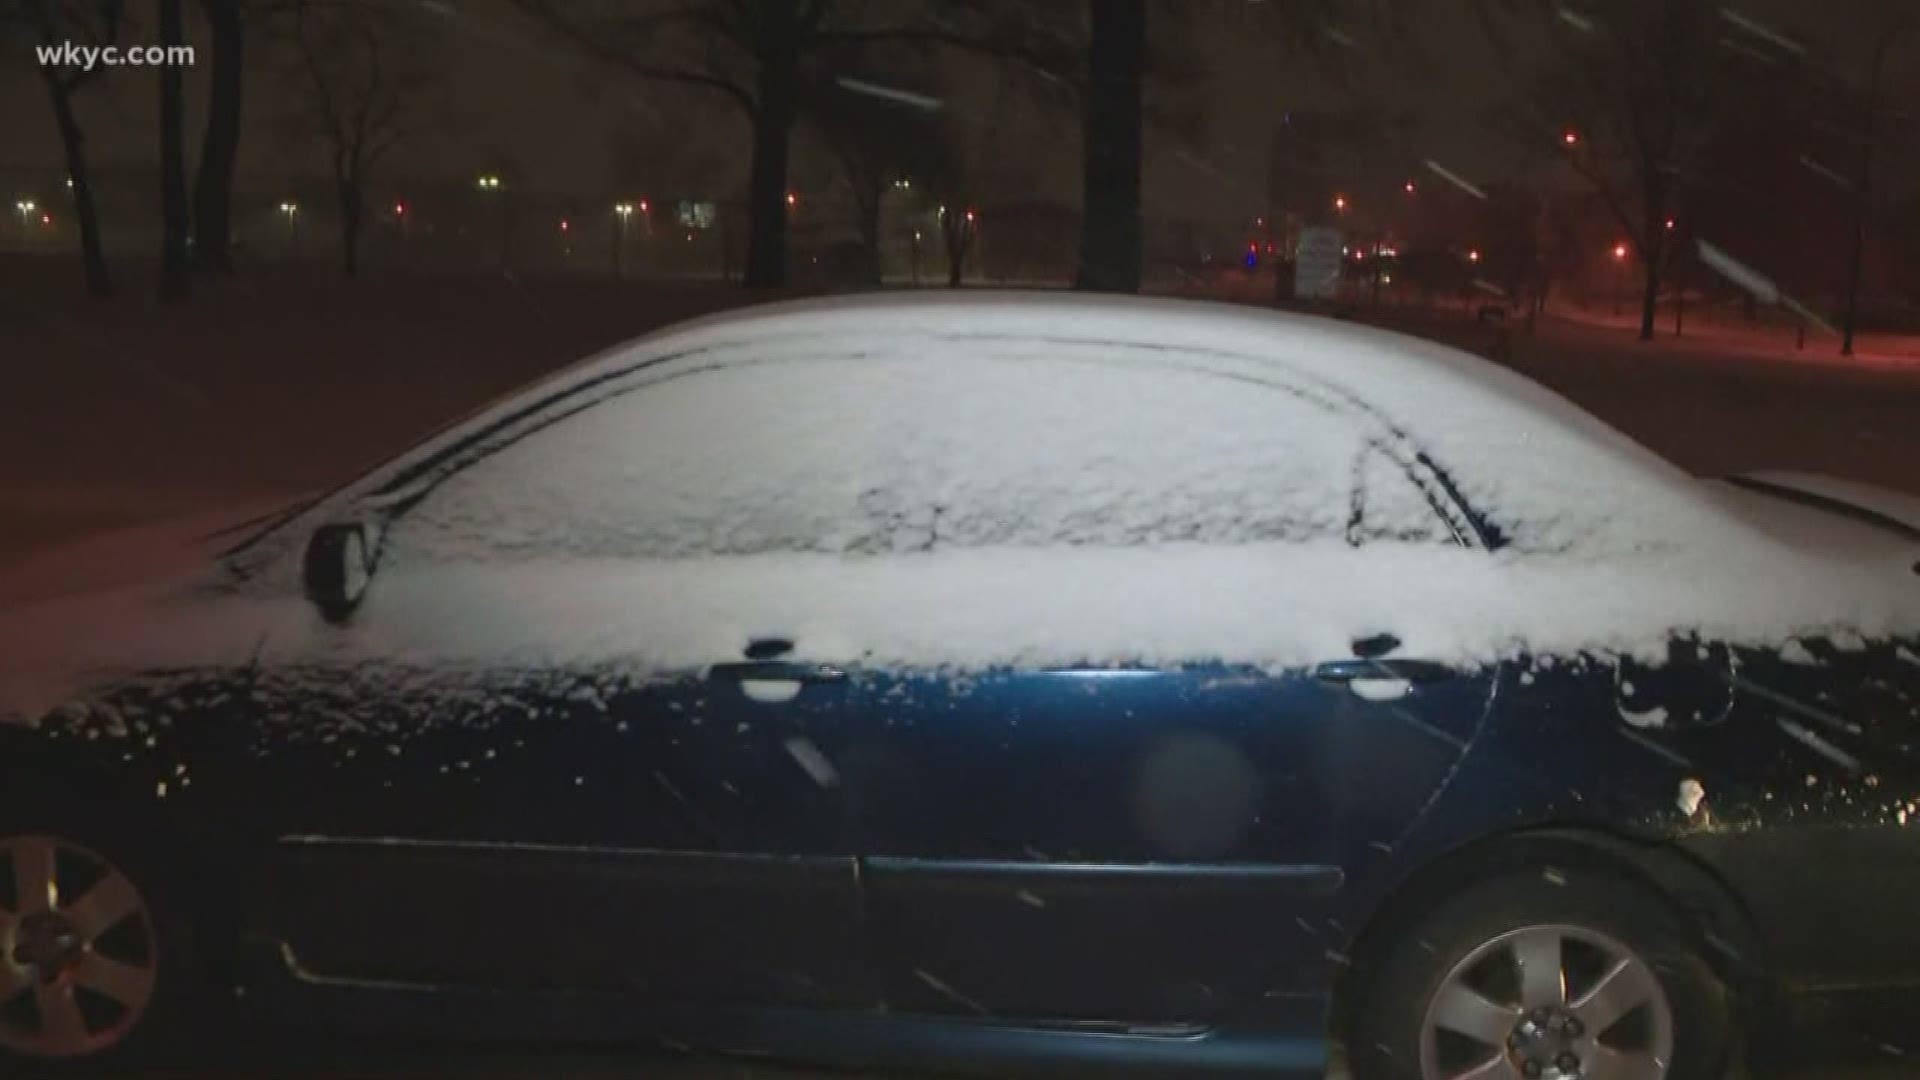 Jan. 24, 2019: We take a look at Akron's road conditions as snow moves through the area this morning.